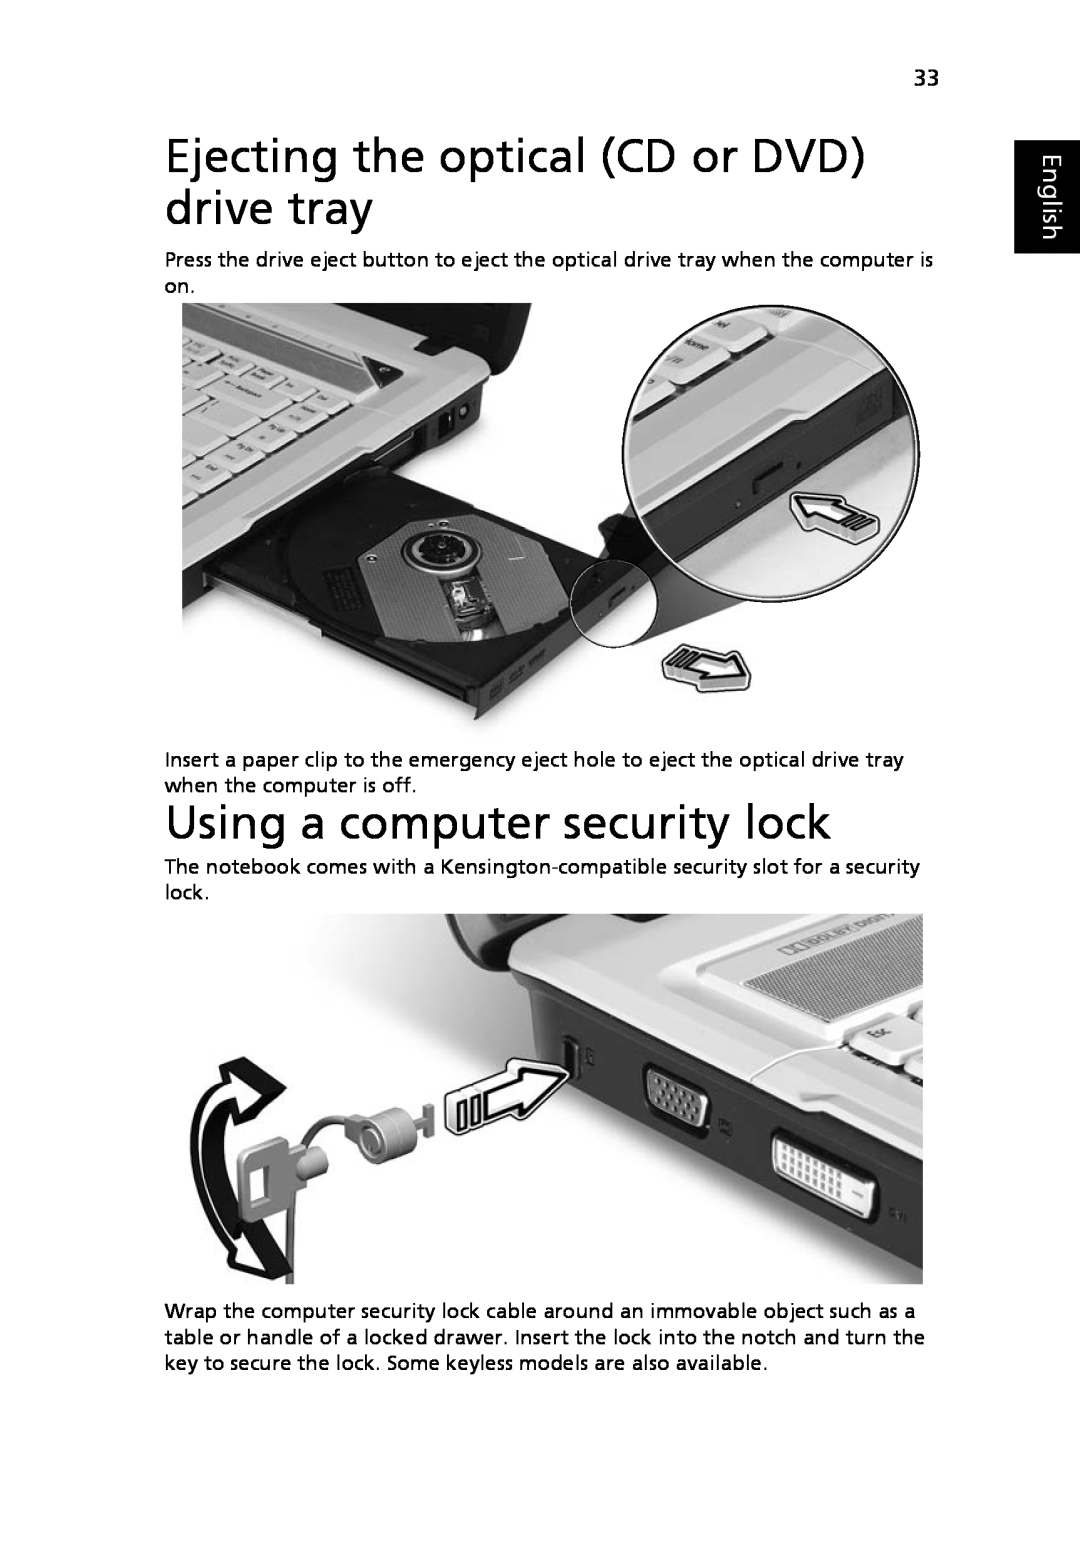 Acer 5520G, 5220 manual Ejecting the optical CD or DVD drive tray, Using a computer security lock, English 